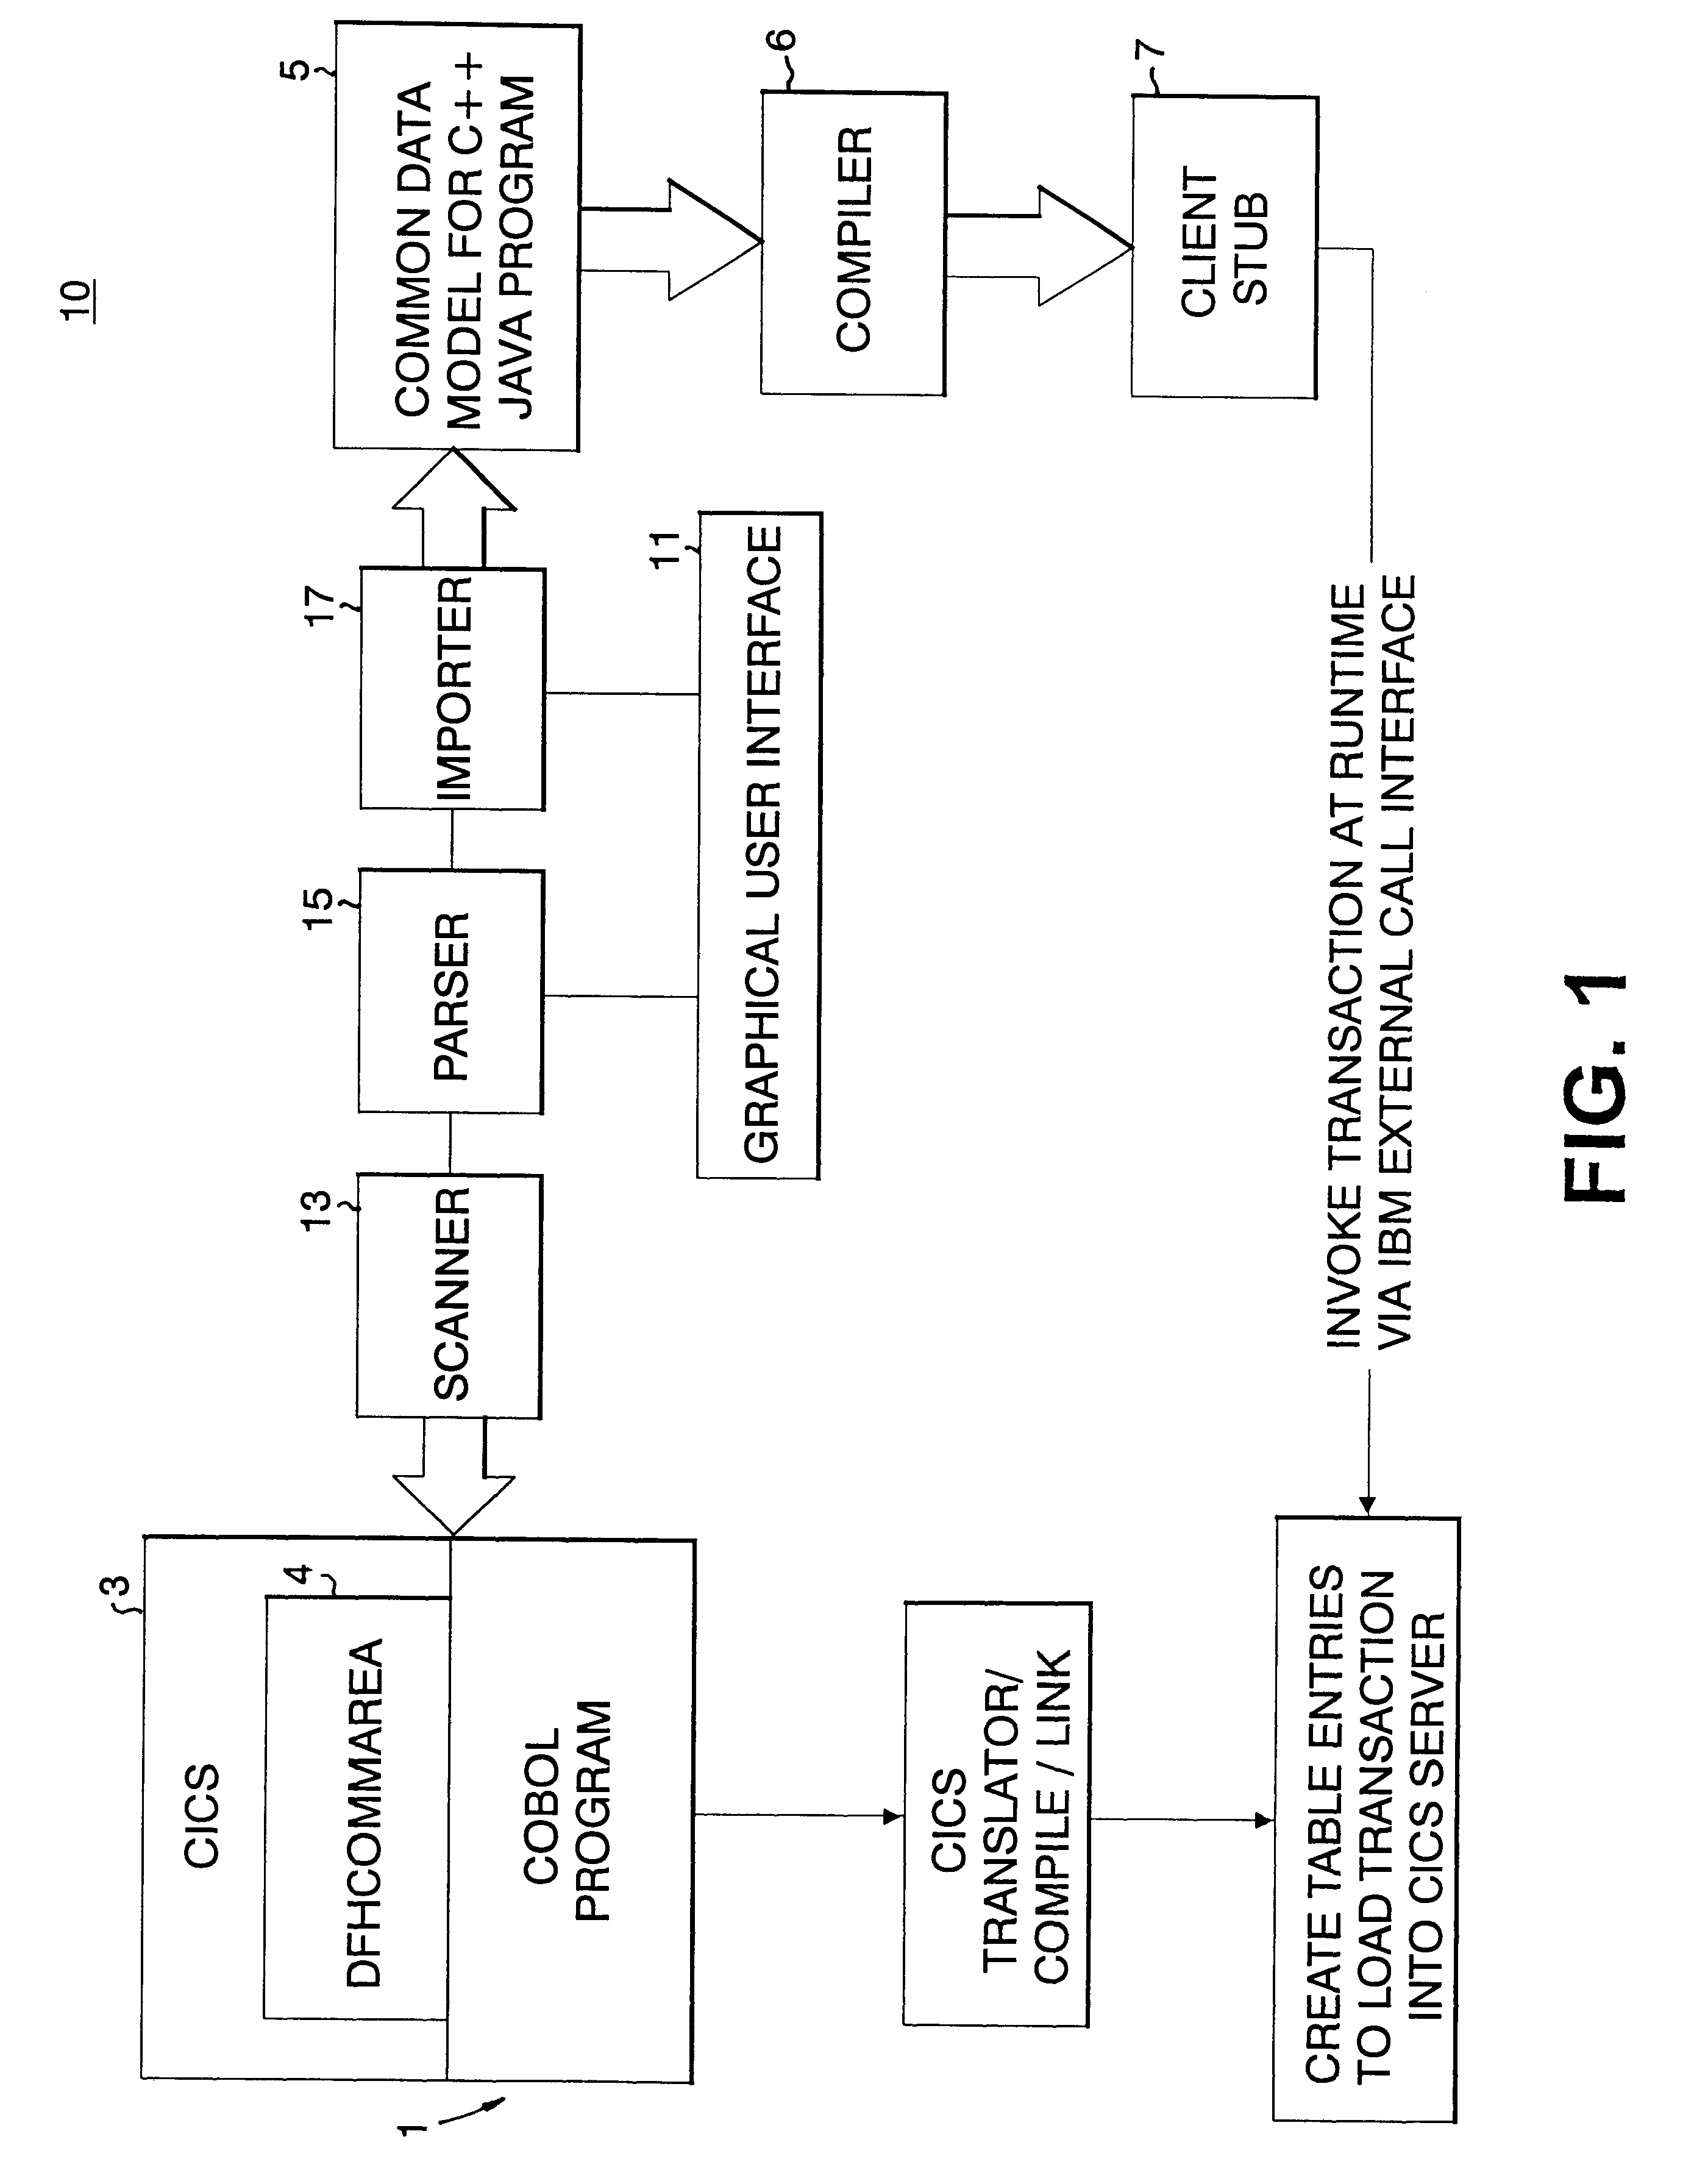 System for automated interface generation for computer programs operating in different environments